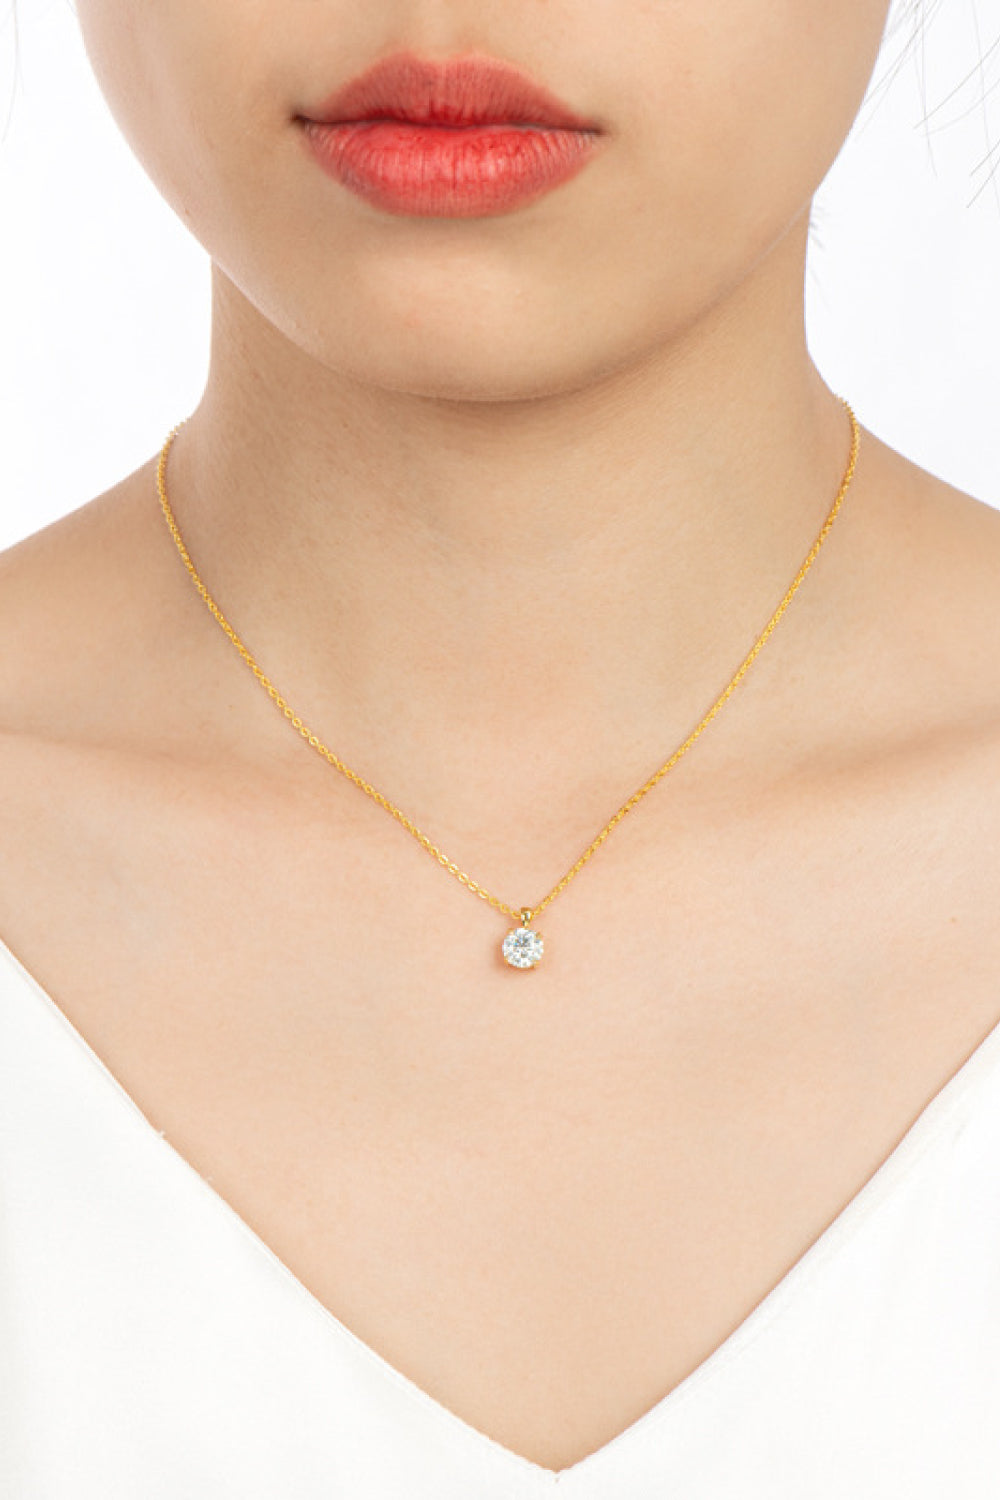 Moissanite Chain-Link Necklace Image1